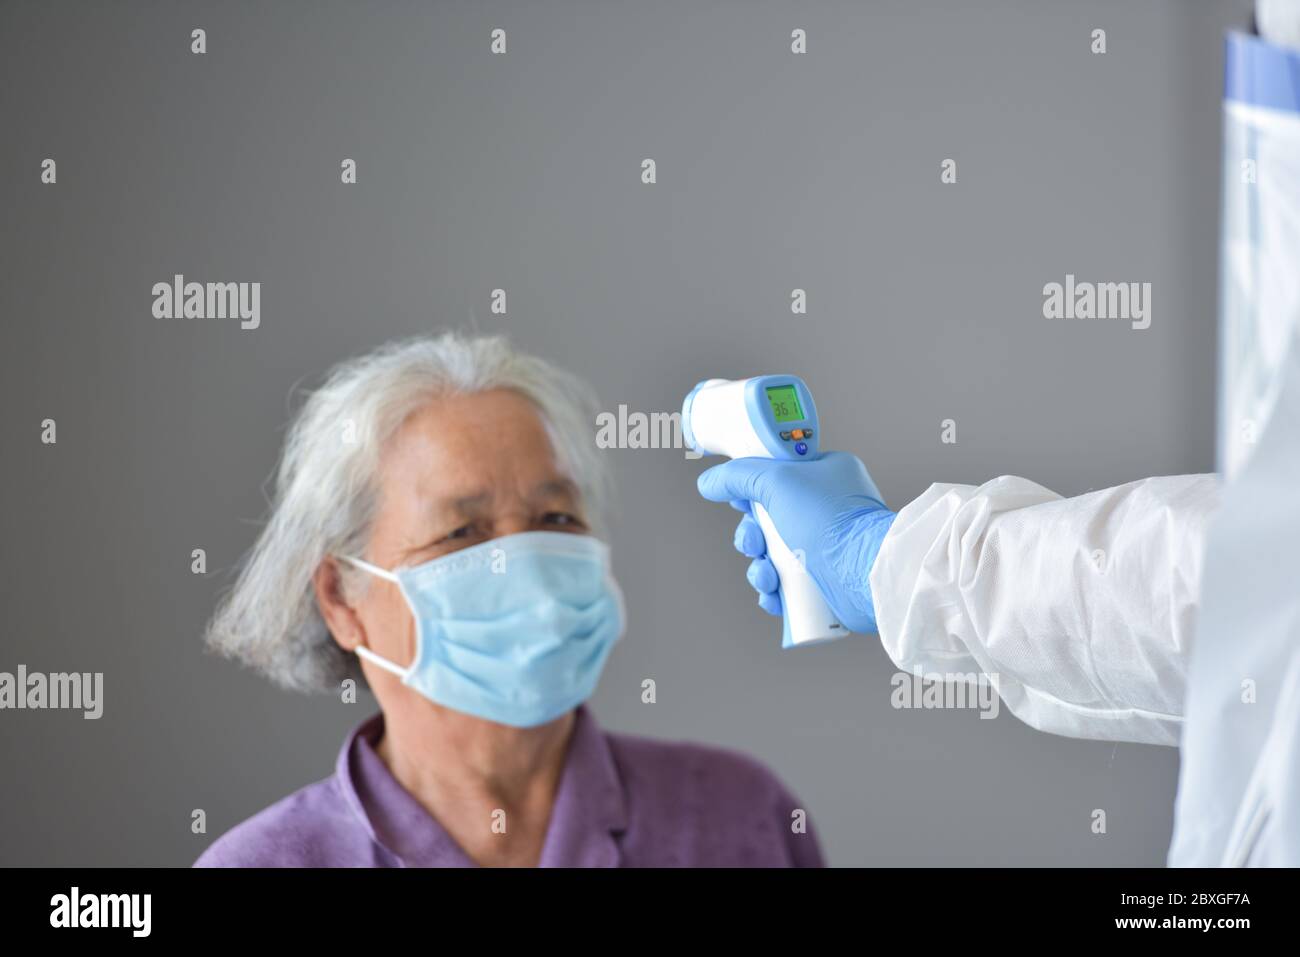 Doctor checking a woman's temperature using an infrared thermometer, Thailand Stock Photo